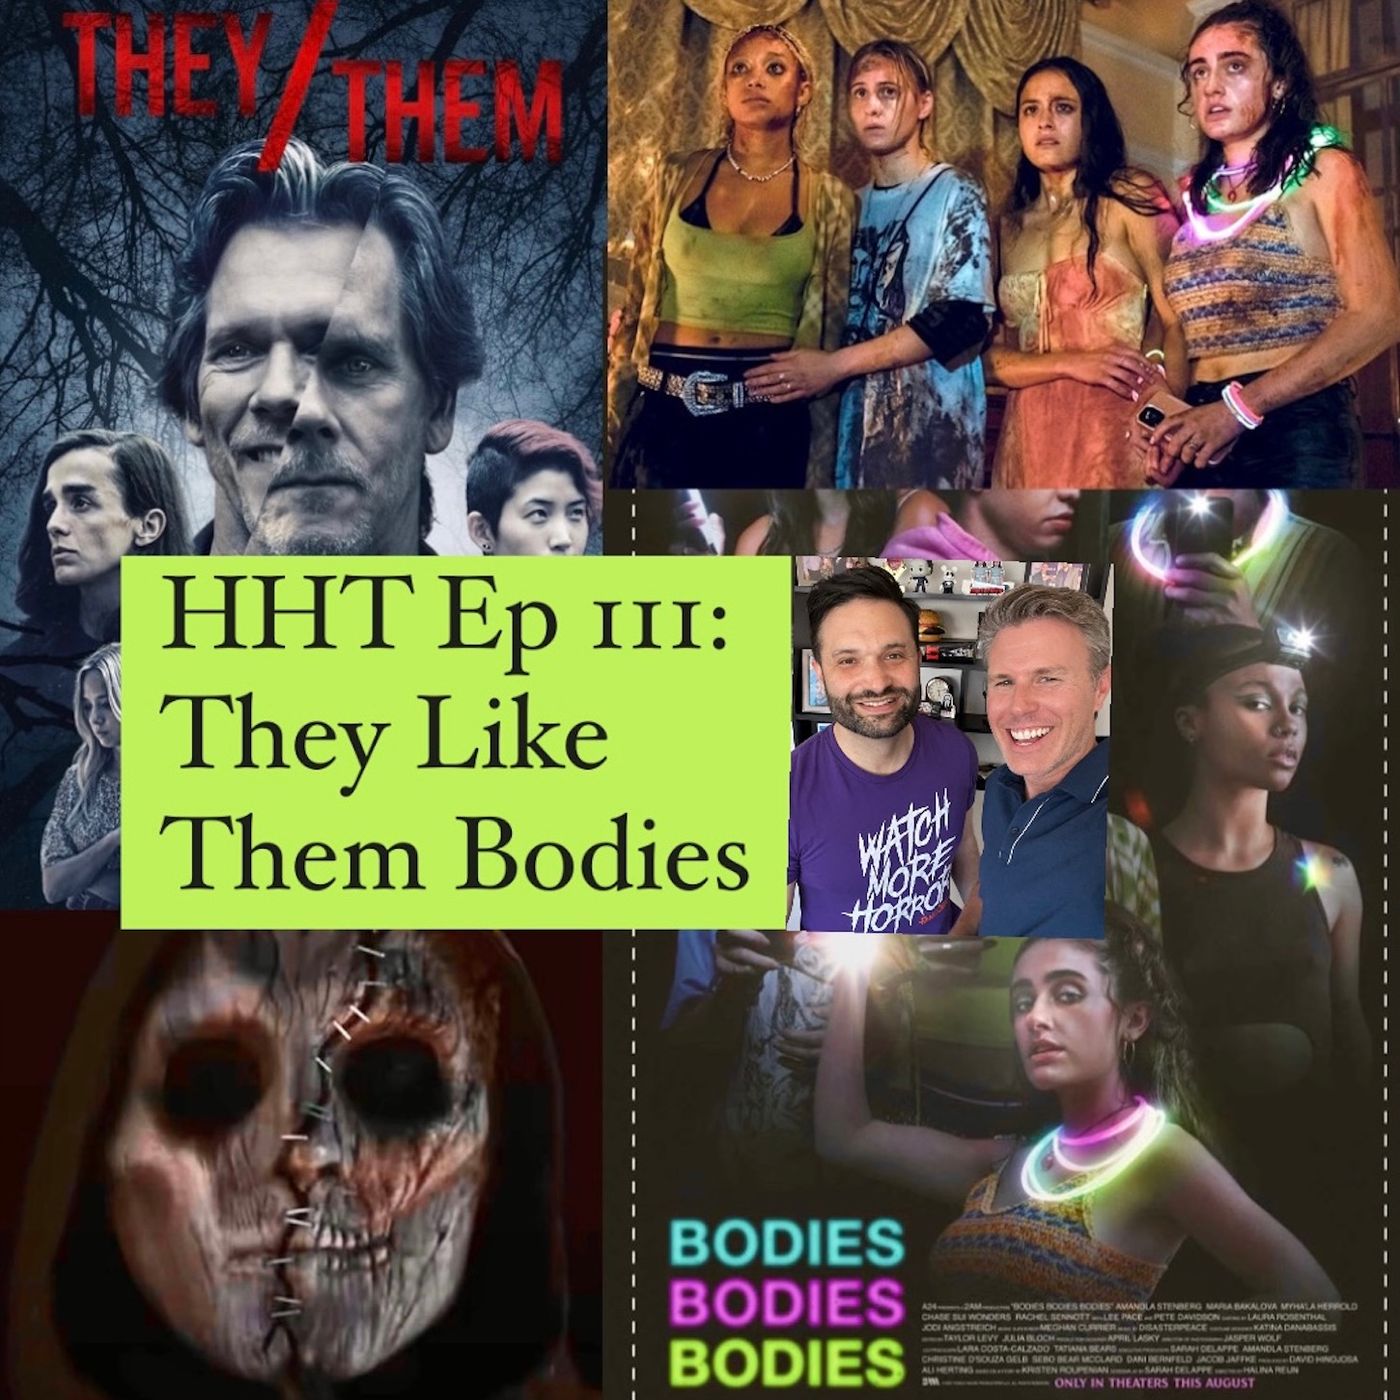 Ep 111: They Like Them Bodies Image